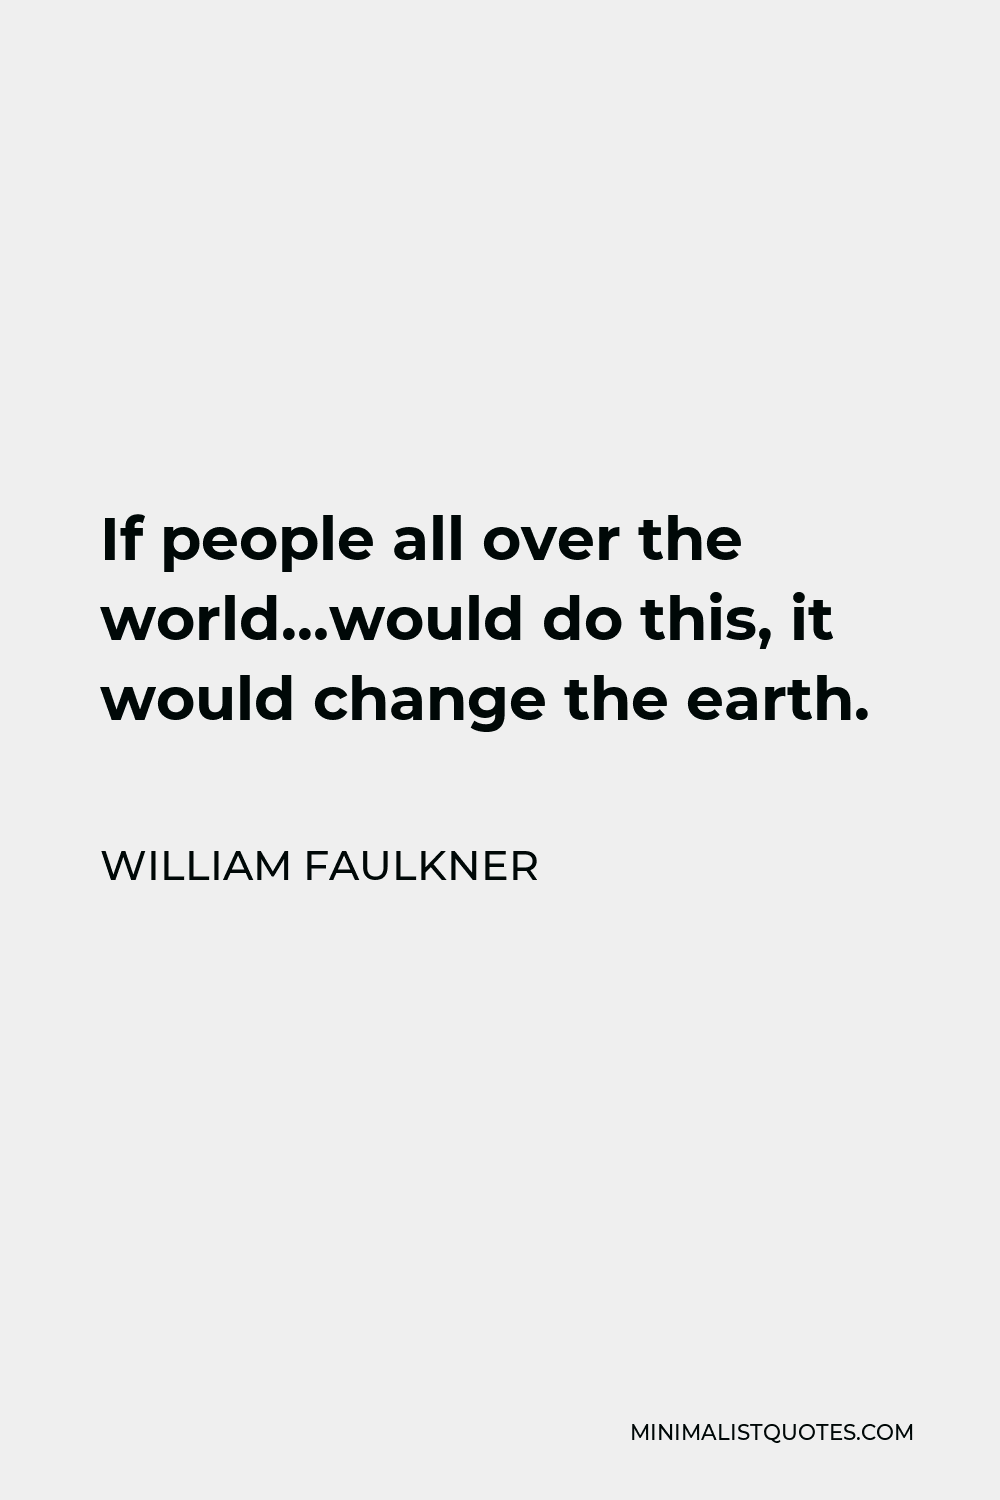 William Faulkner Quote - If people all over the world…would do this, it would change the earth.